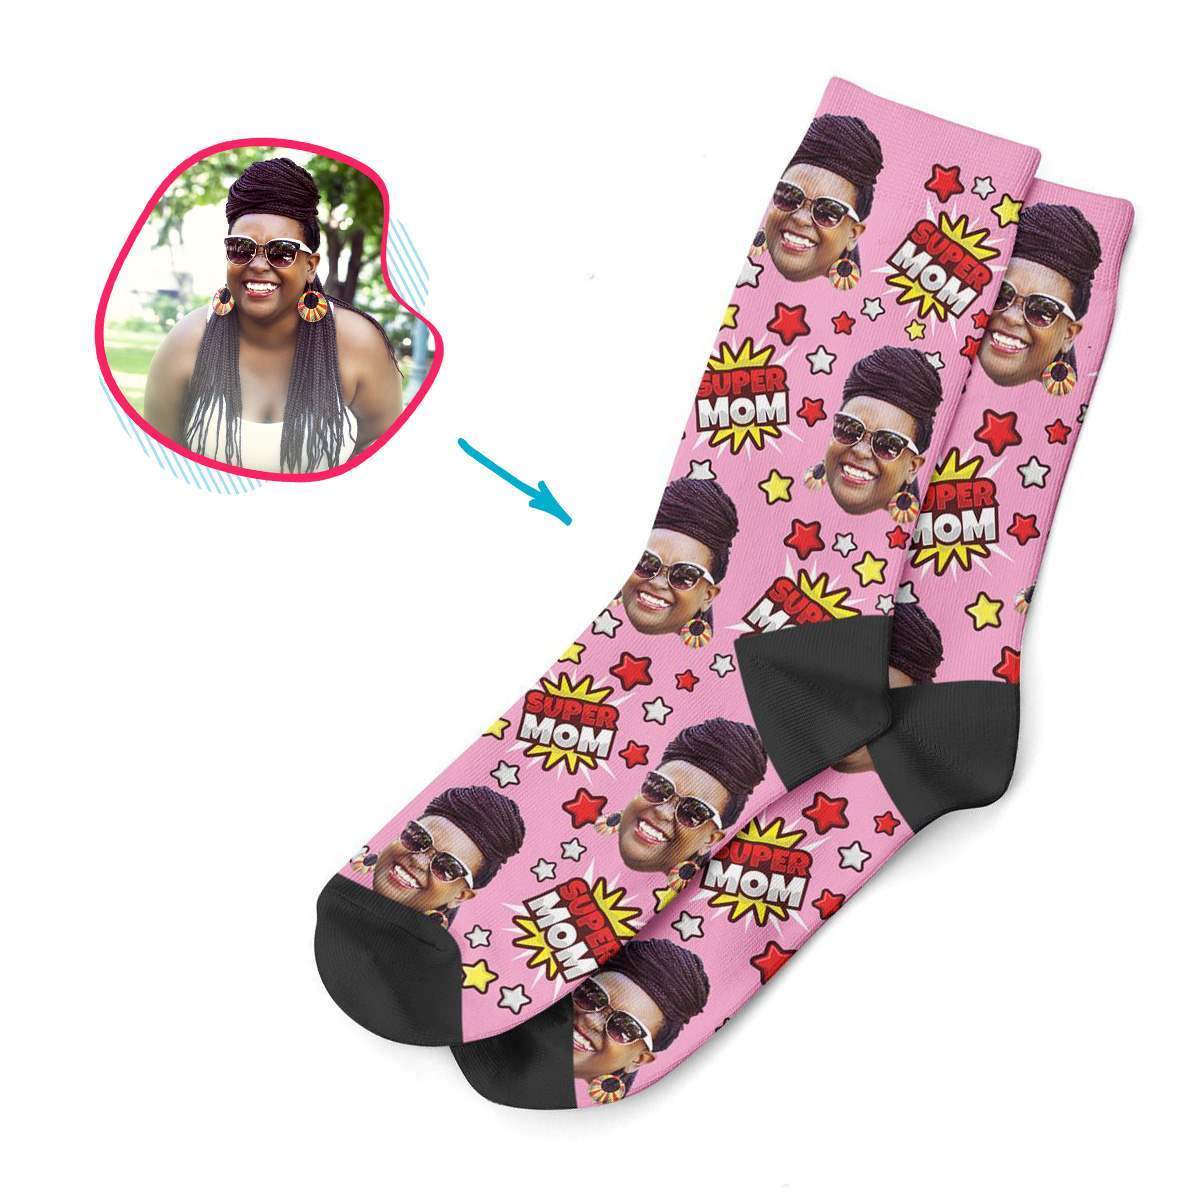 pink Super Mom socks personalized with photo of face printed on them